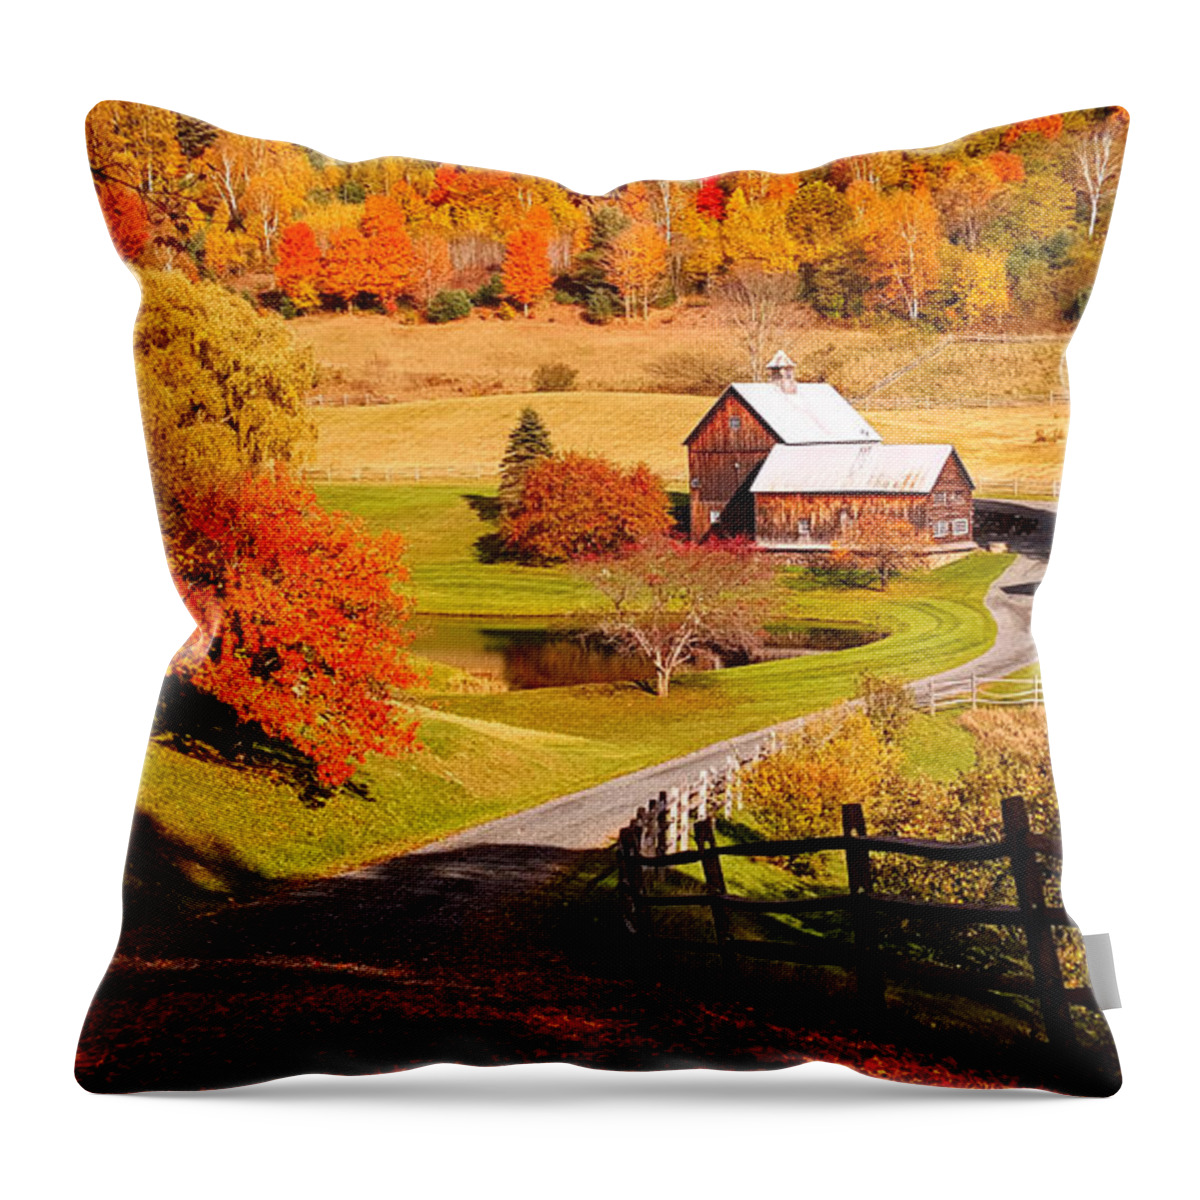 Sleepy Hollow Farm Throw Pillow featuring the photograph Coming home in a Vermont autumn by Jeff Folger